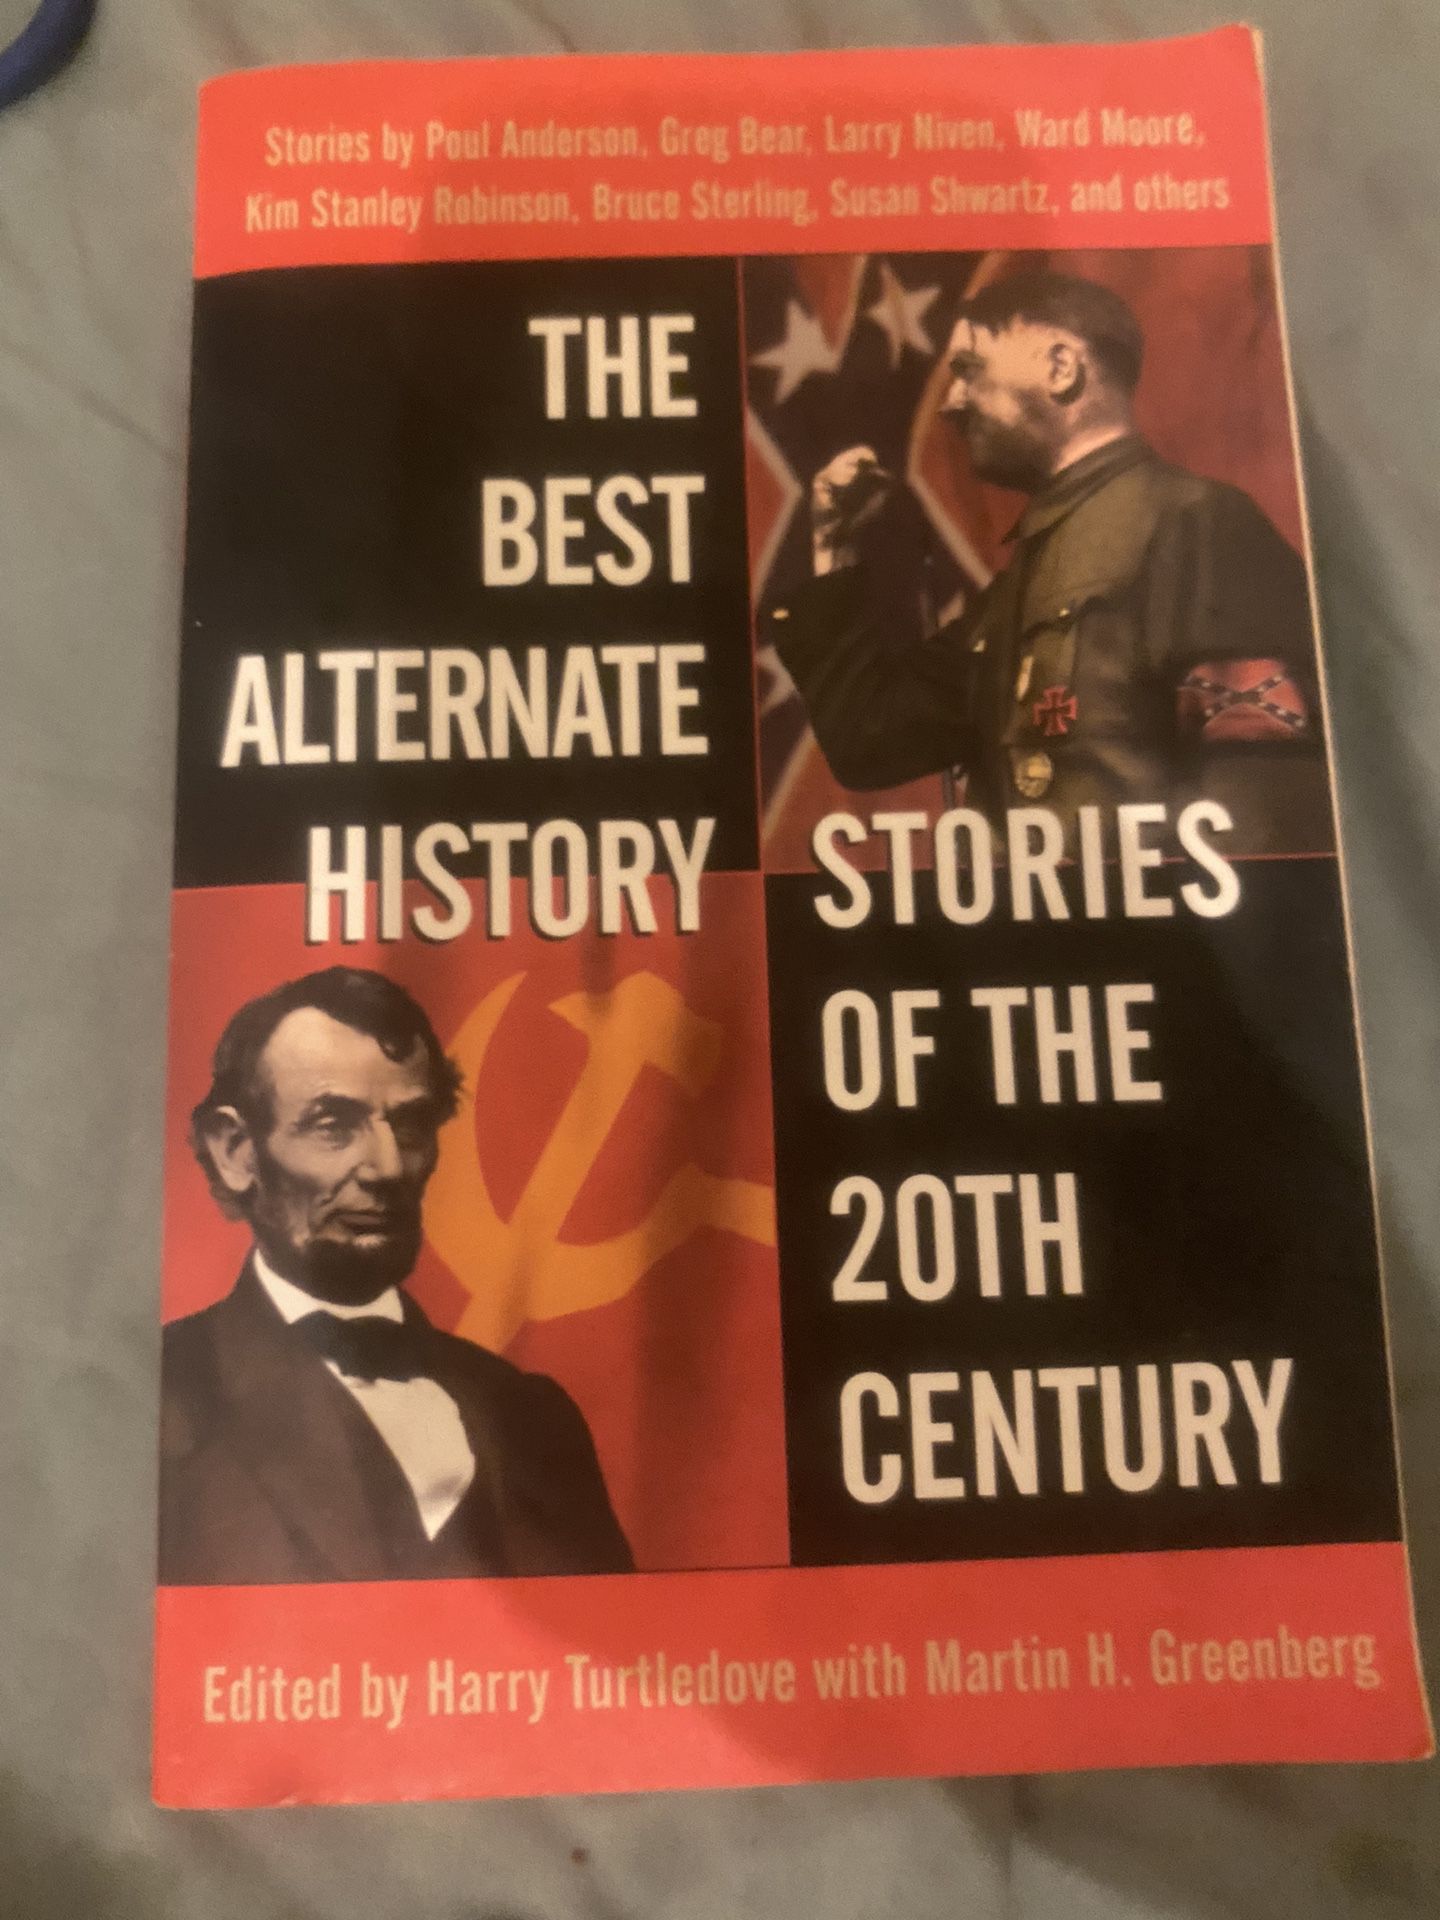 The best Alternate History Stories of the 20th century